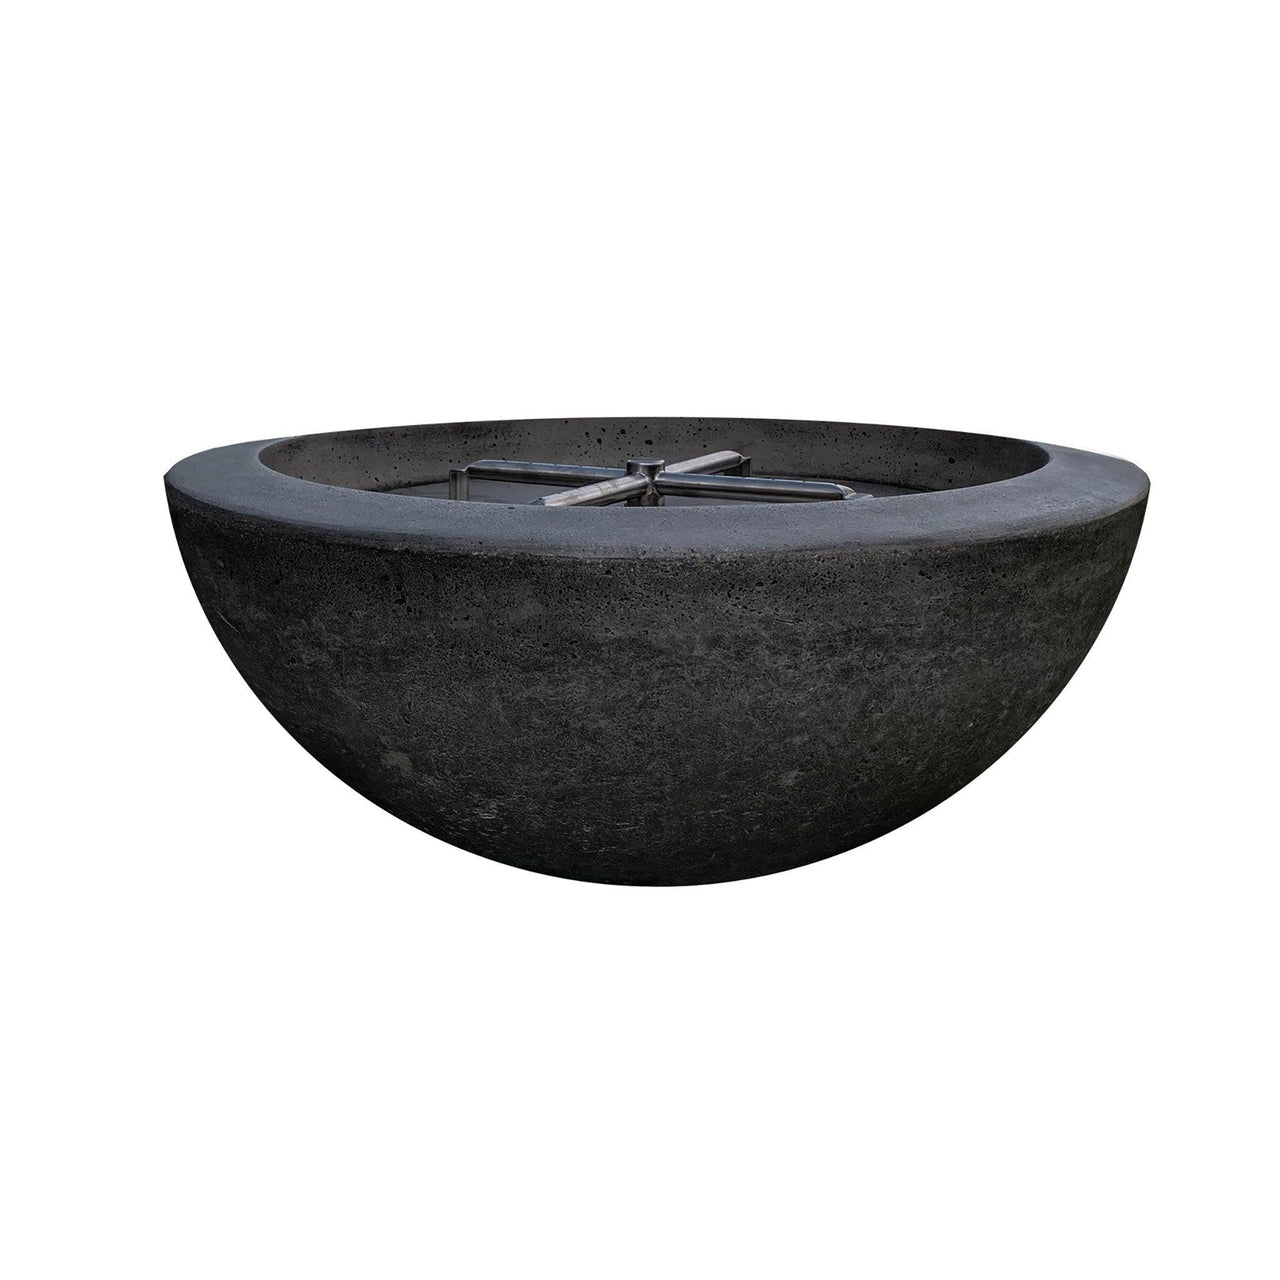 Prism Hardscapes - Moderno Series 2 Round Concrete Fire Bowl - Fire Pit Stock